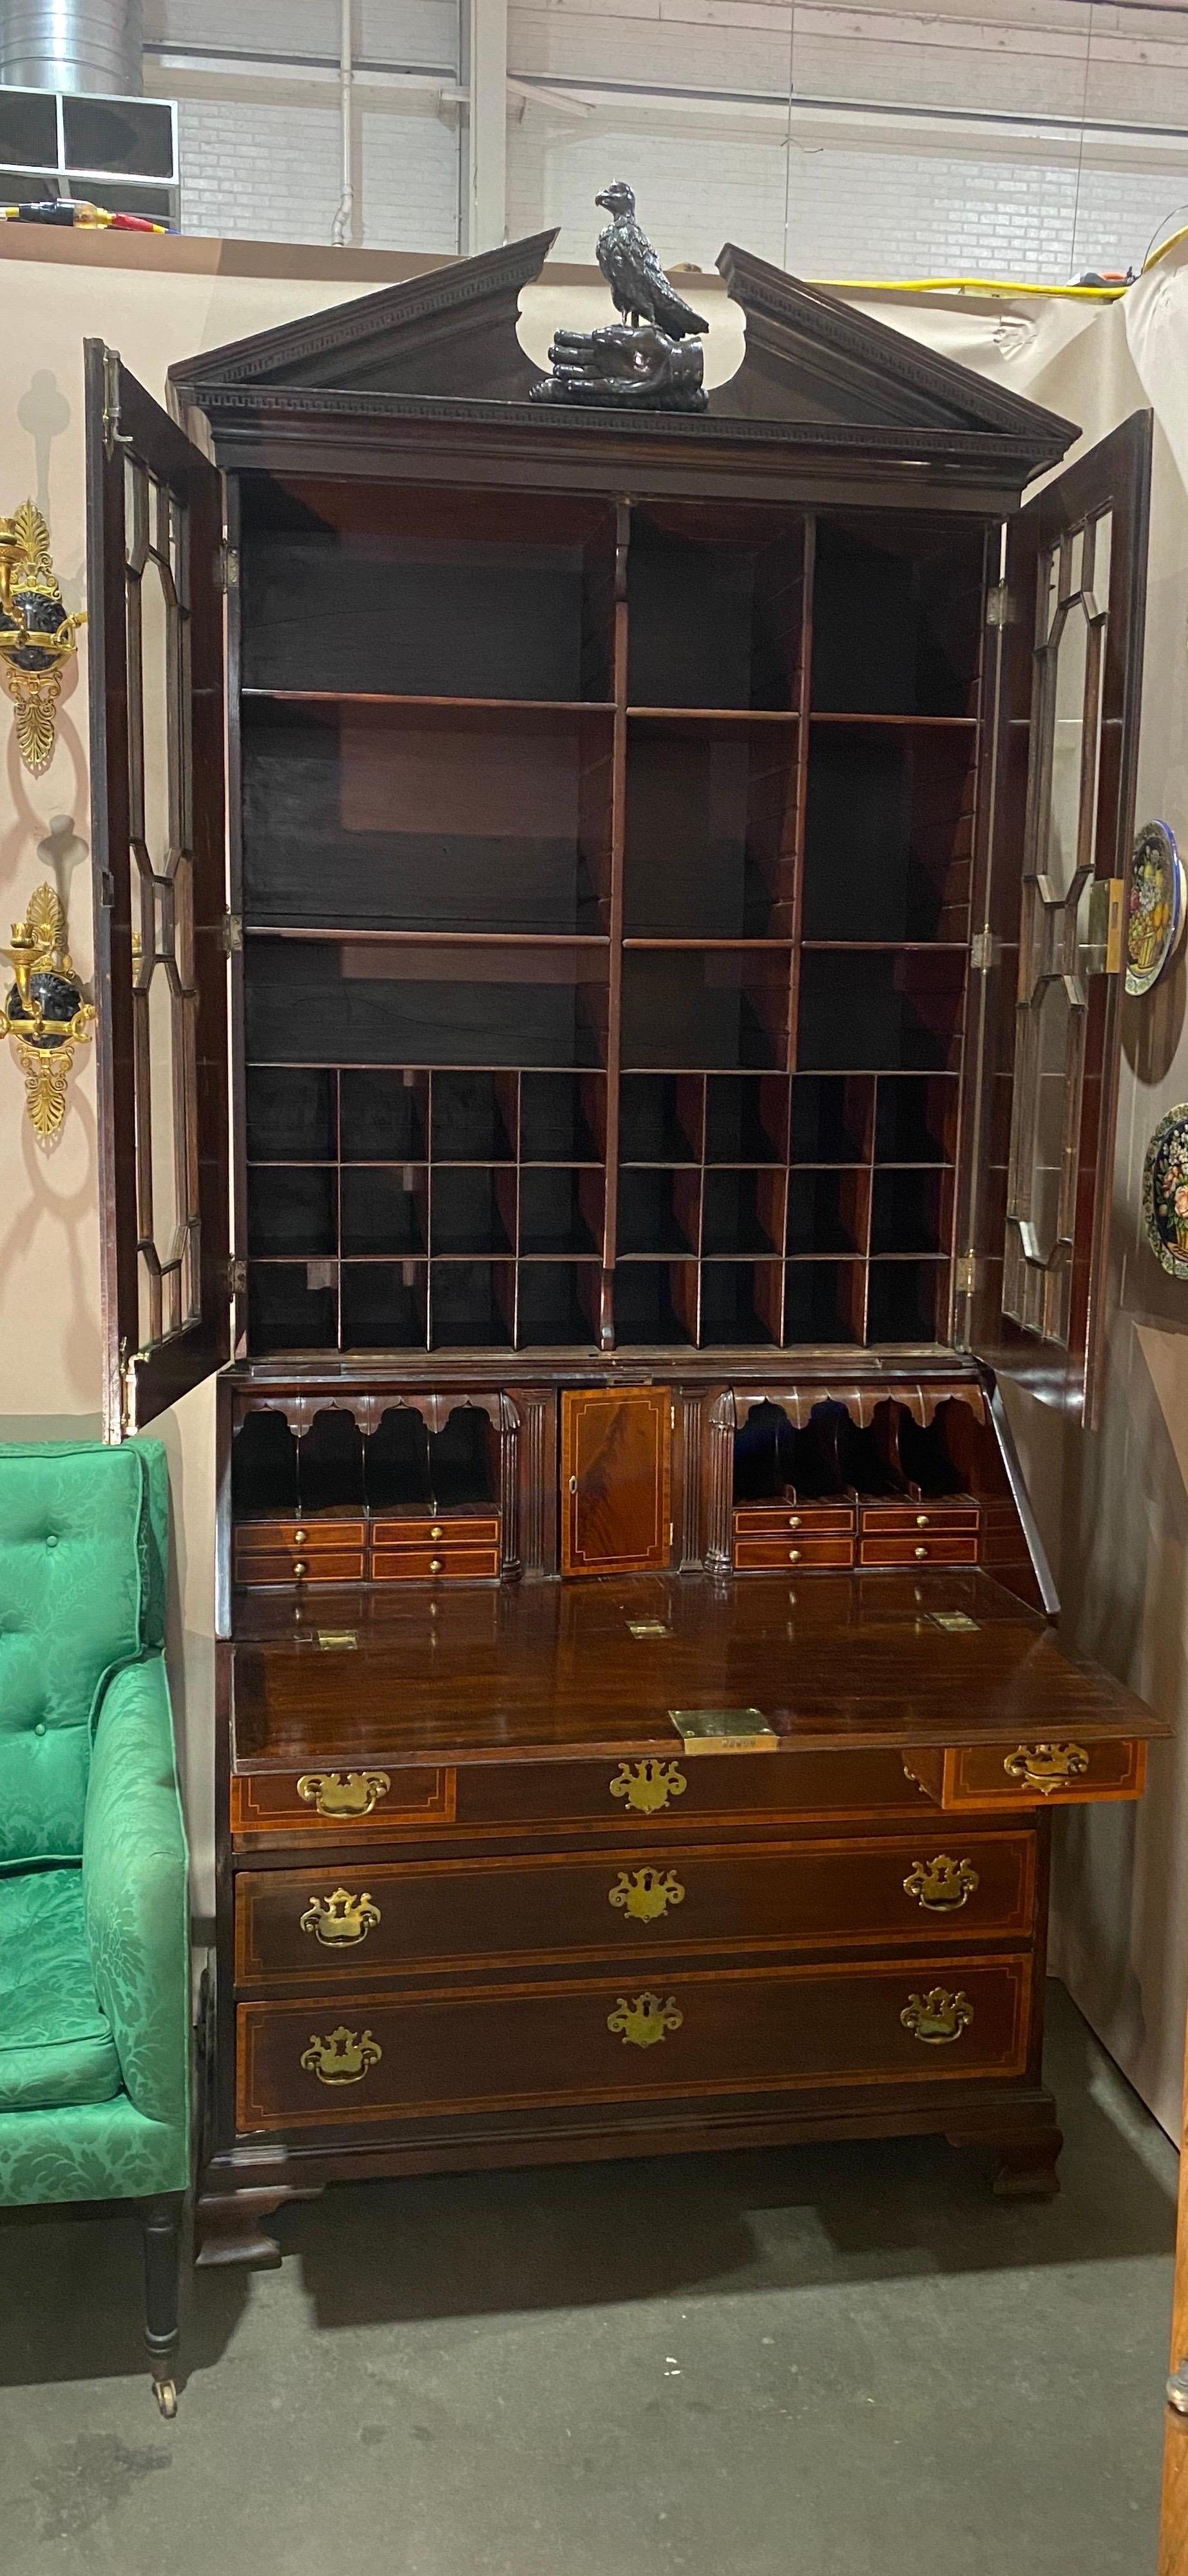 Very good inlaid Georgian secretary with a falconer pediment, probably by Gillows. The secretary features glazed doors surrounded by inlaid stop fluted columns and capitals that are almost identical to examples by Gillows. The fall front opens to